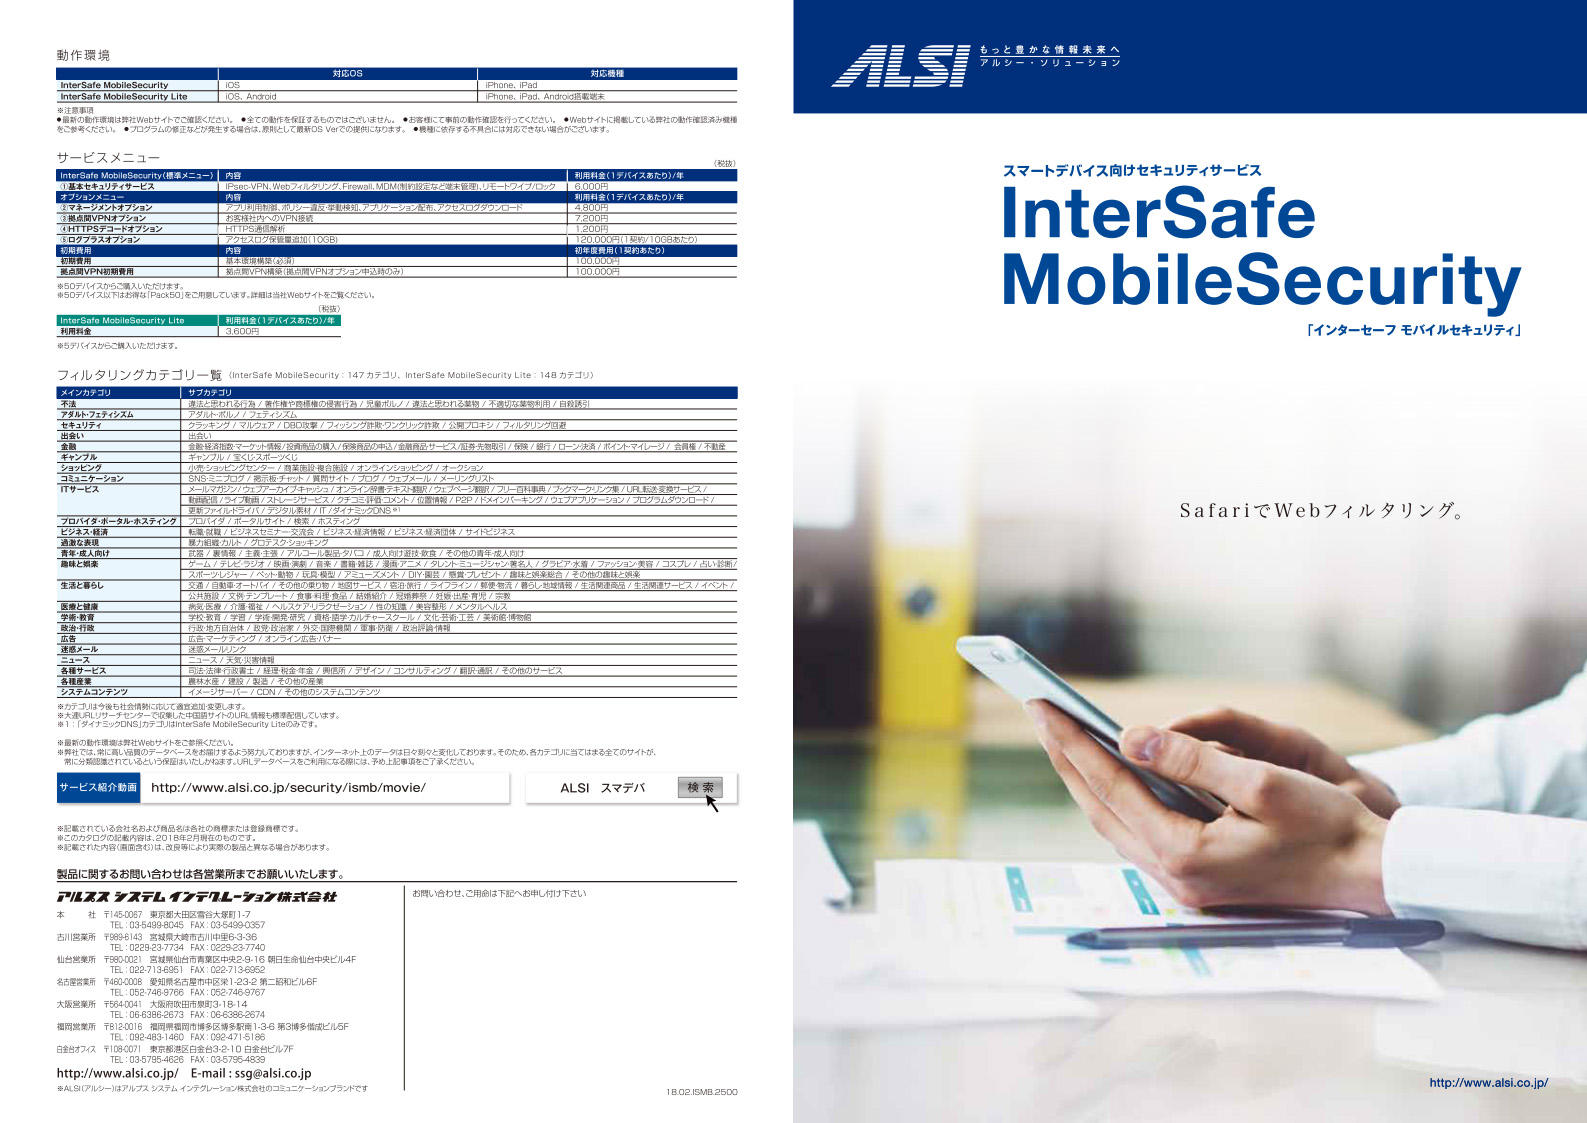 InterSafe MobileSecurity / Lite
カタログ（A3サイズ印刷用）